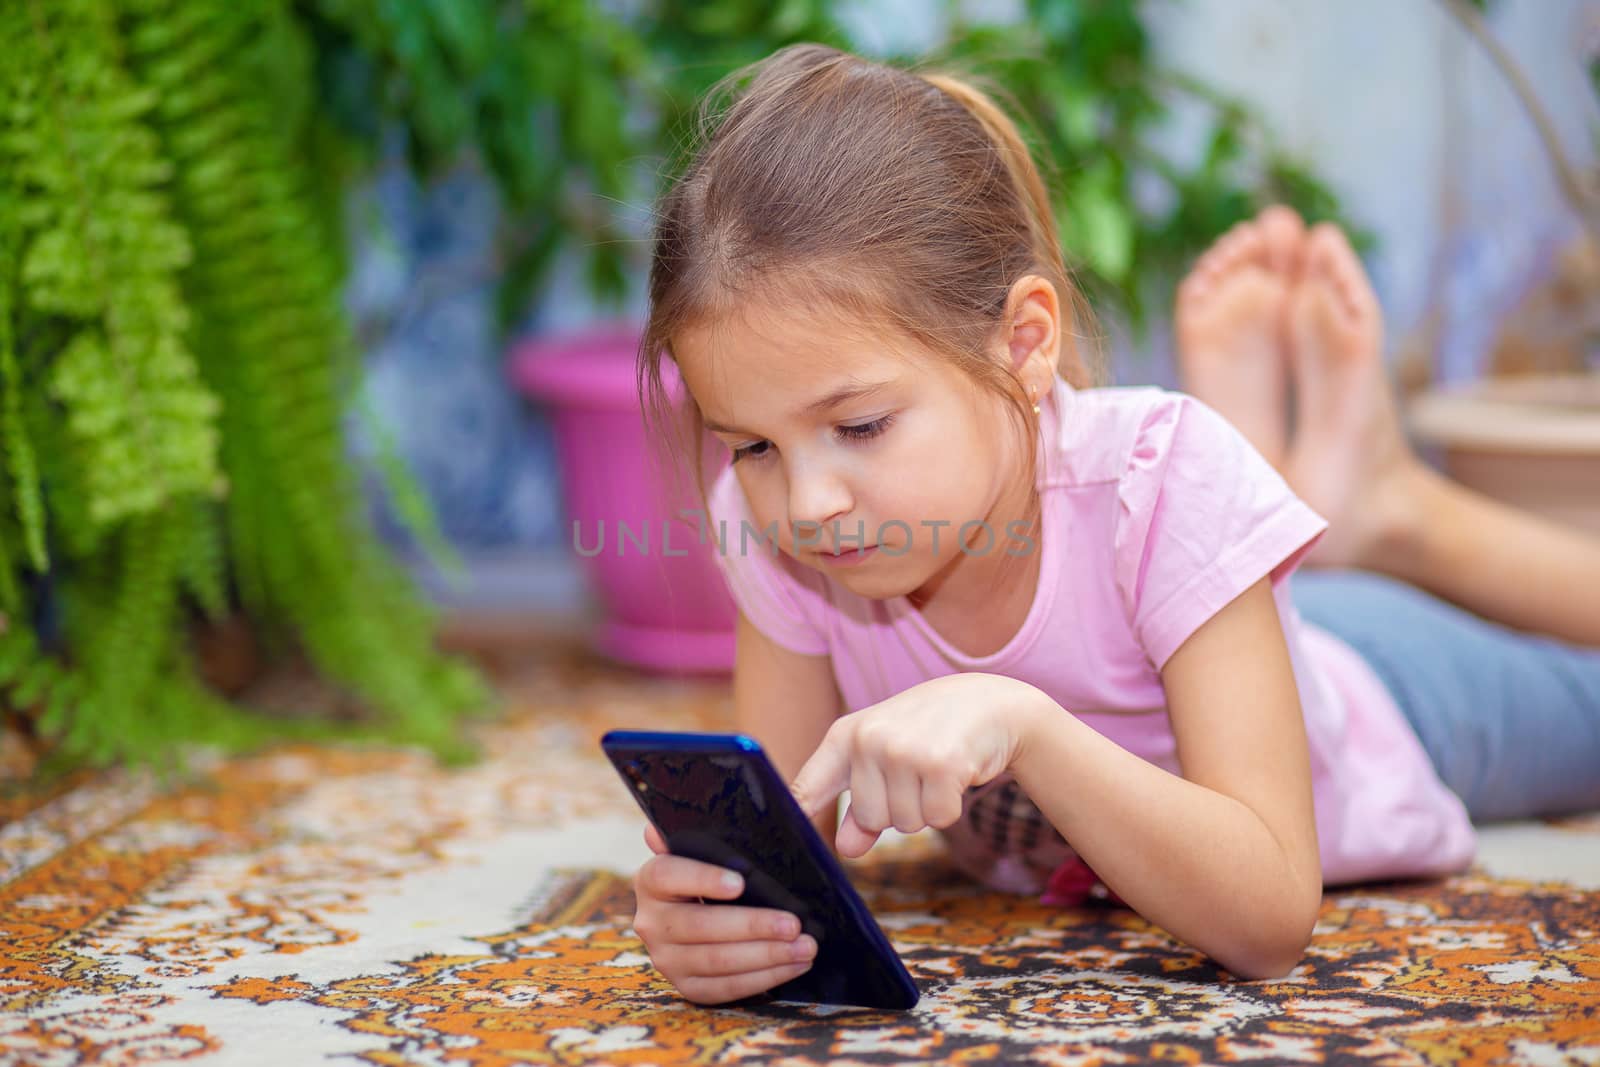 A girl lies on the floor and plays on a smartphone. Child and technology. The child sits at home and has fun with the phone.